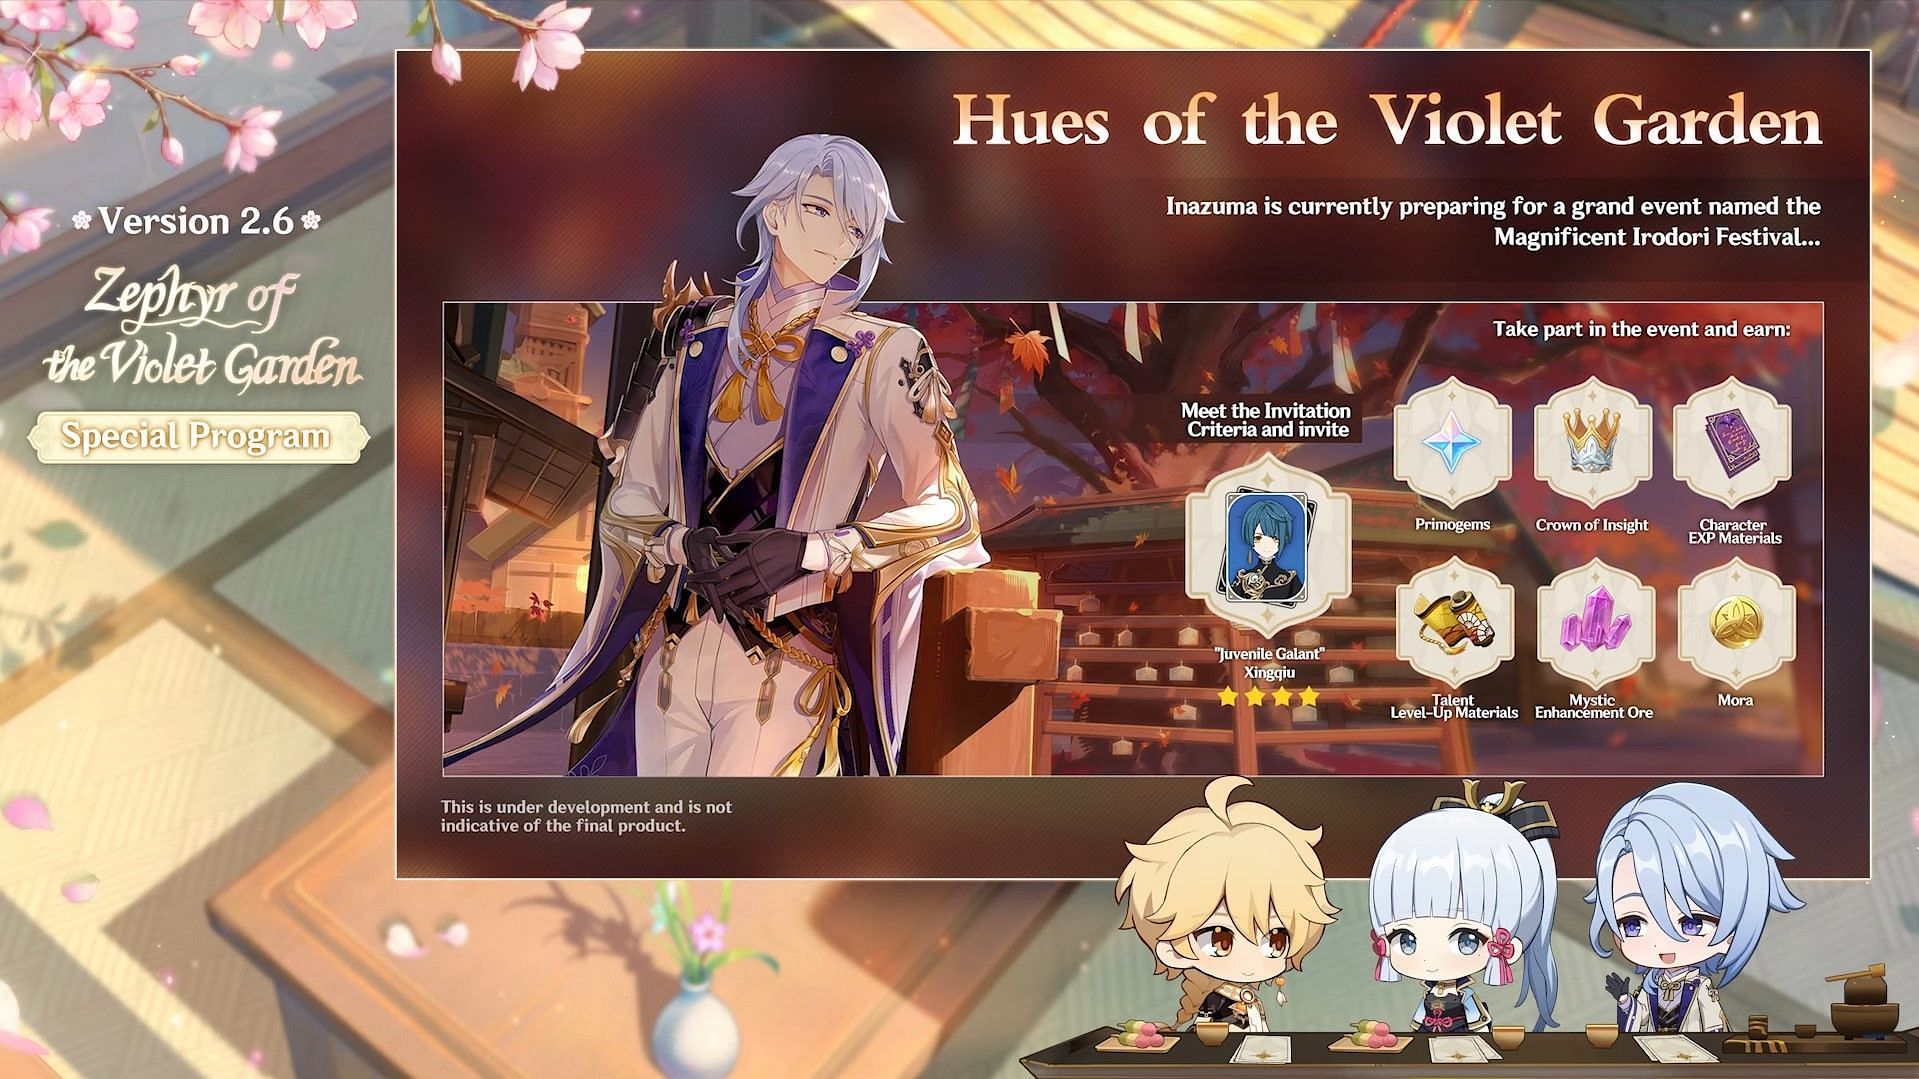 Hues of the Violet Garden is the main event of Genshin Impact 2.6 (Image via miHoYo)